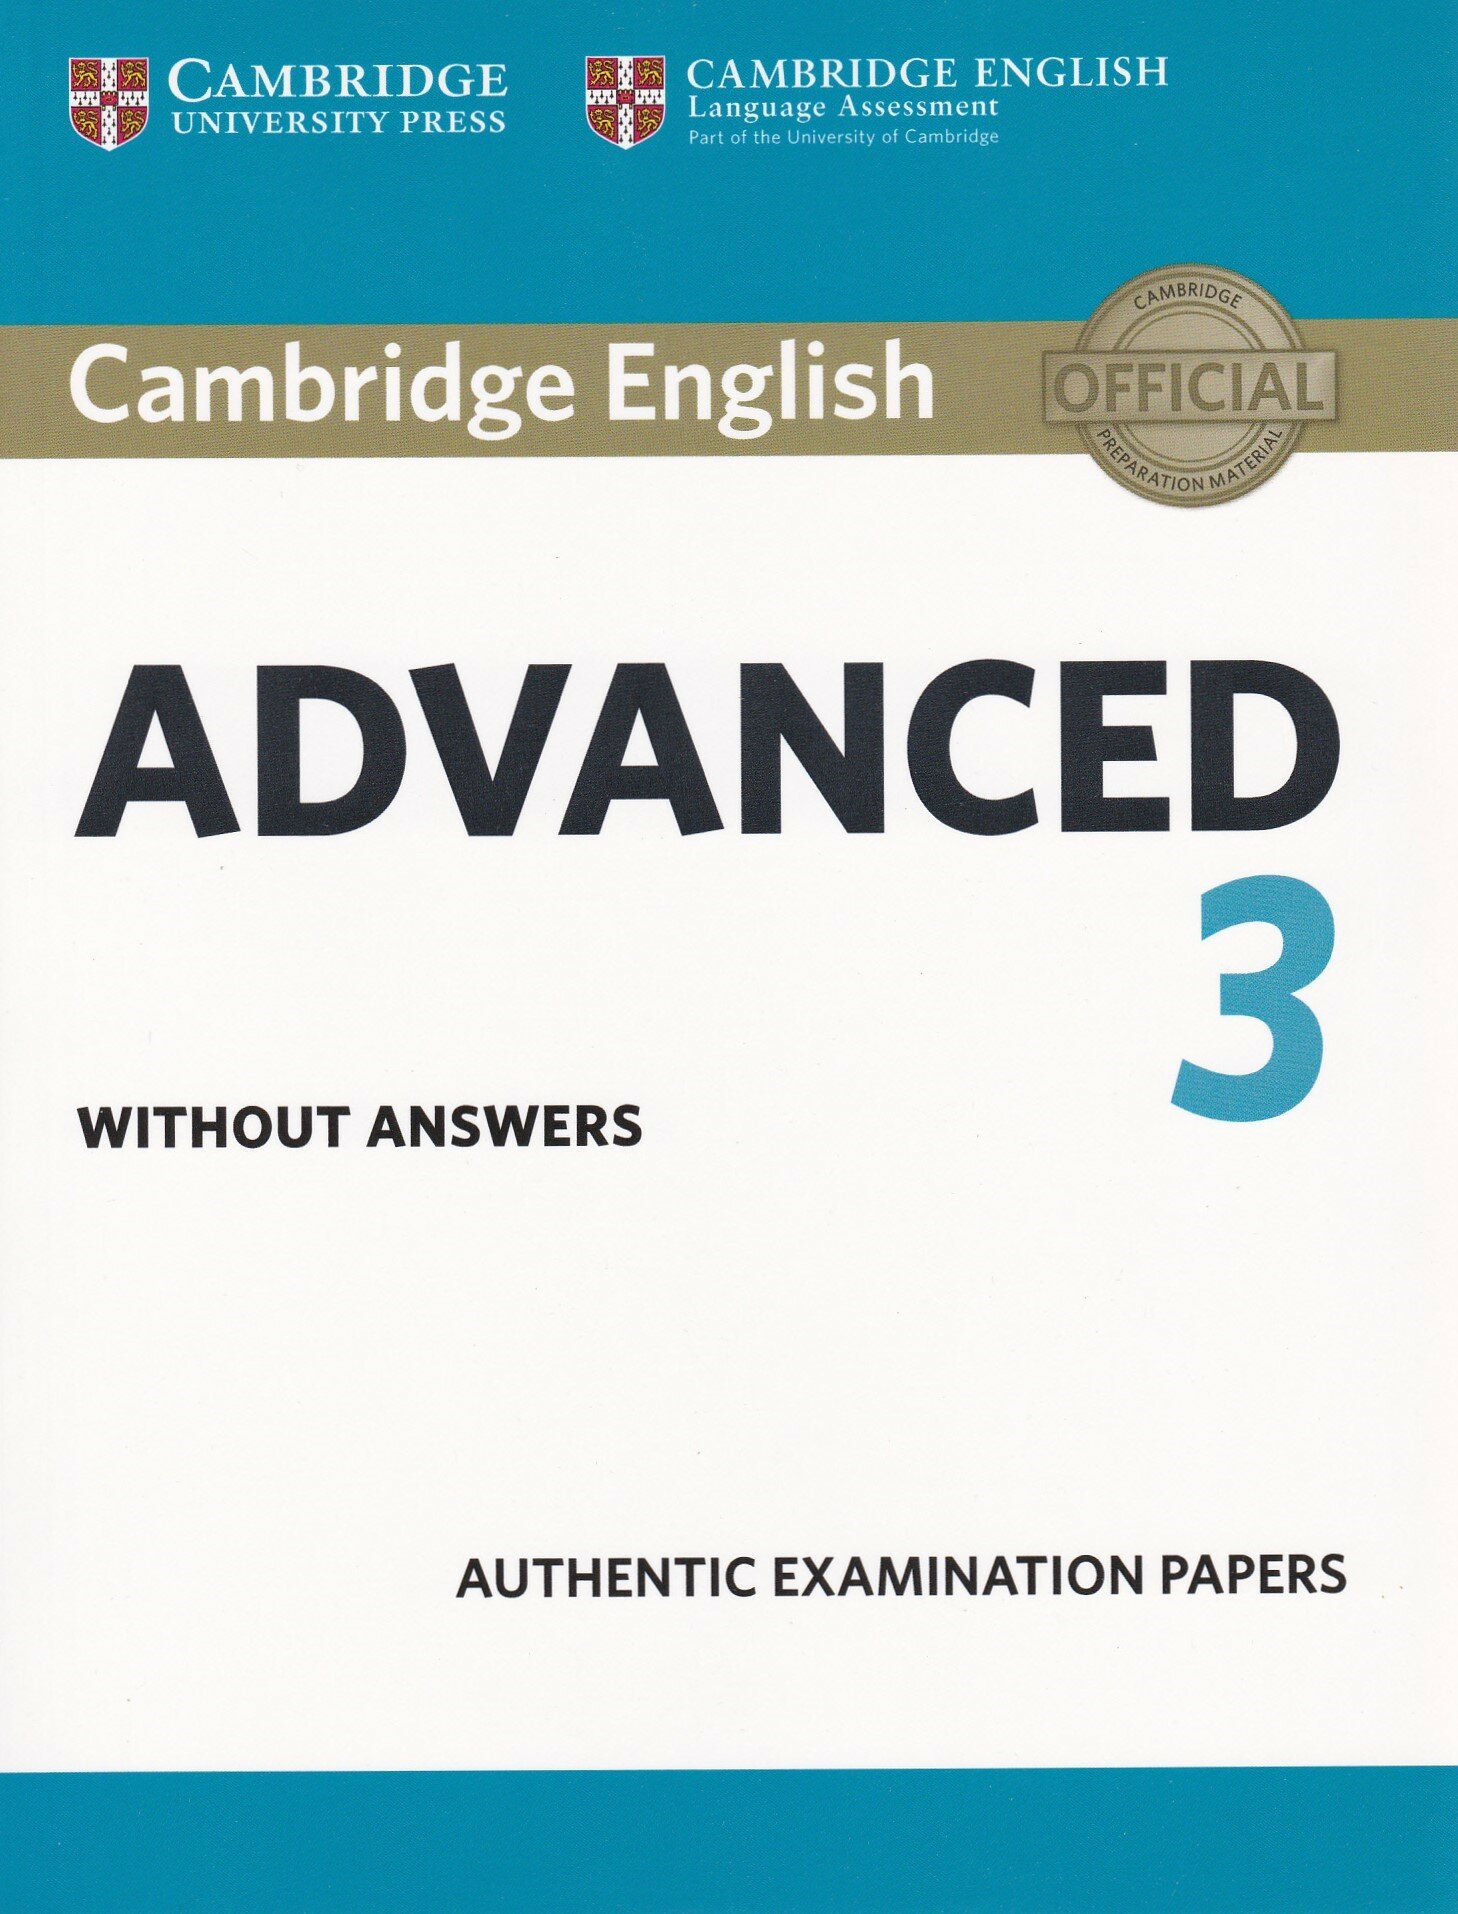 Cambridge English Advanced 3 Student's Book without Answers